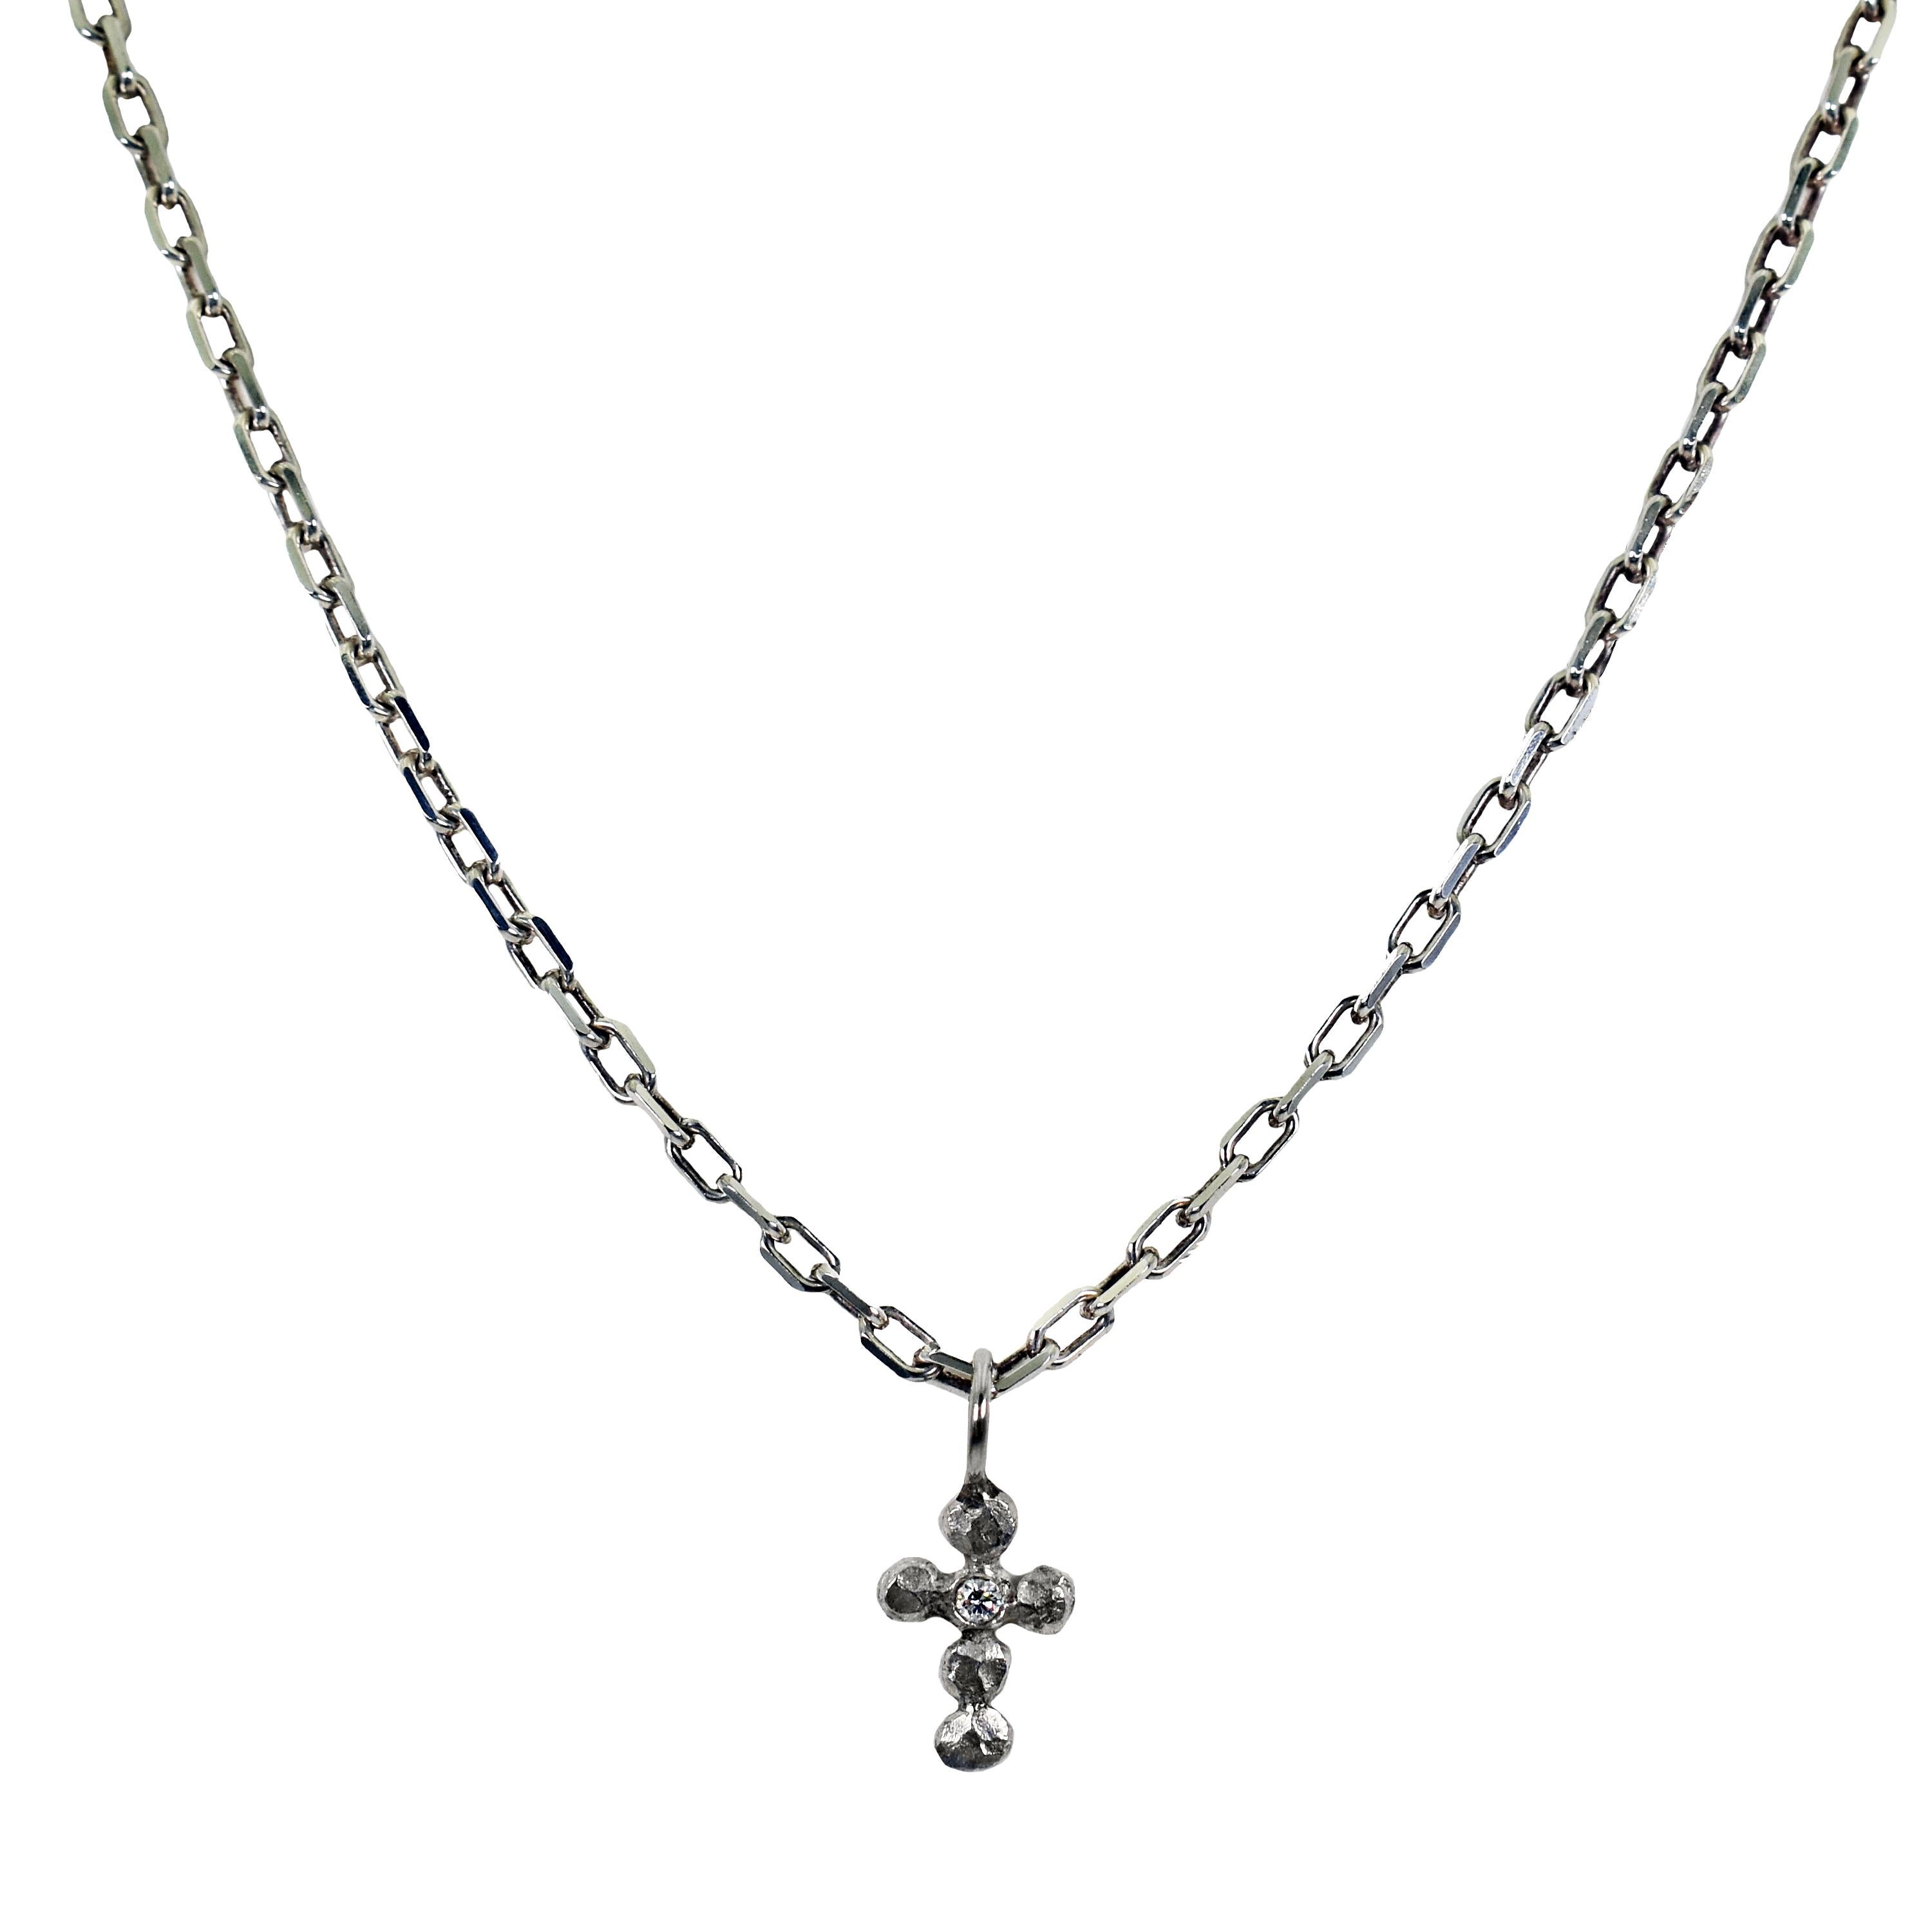 Diamond and sterling silver bubble cross pendant on a 16 inch sterling silver chain necklace. Cross pendant is 0.81 inch in length. 